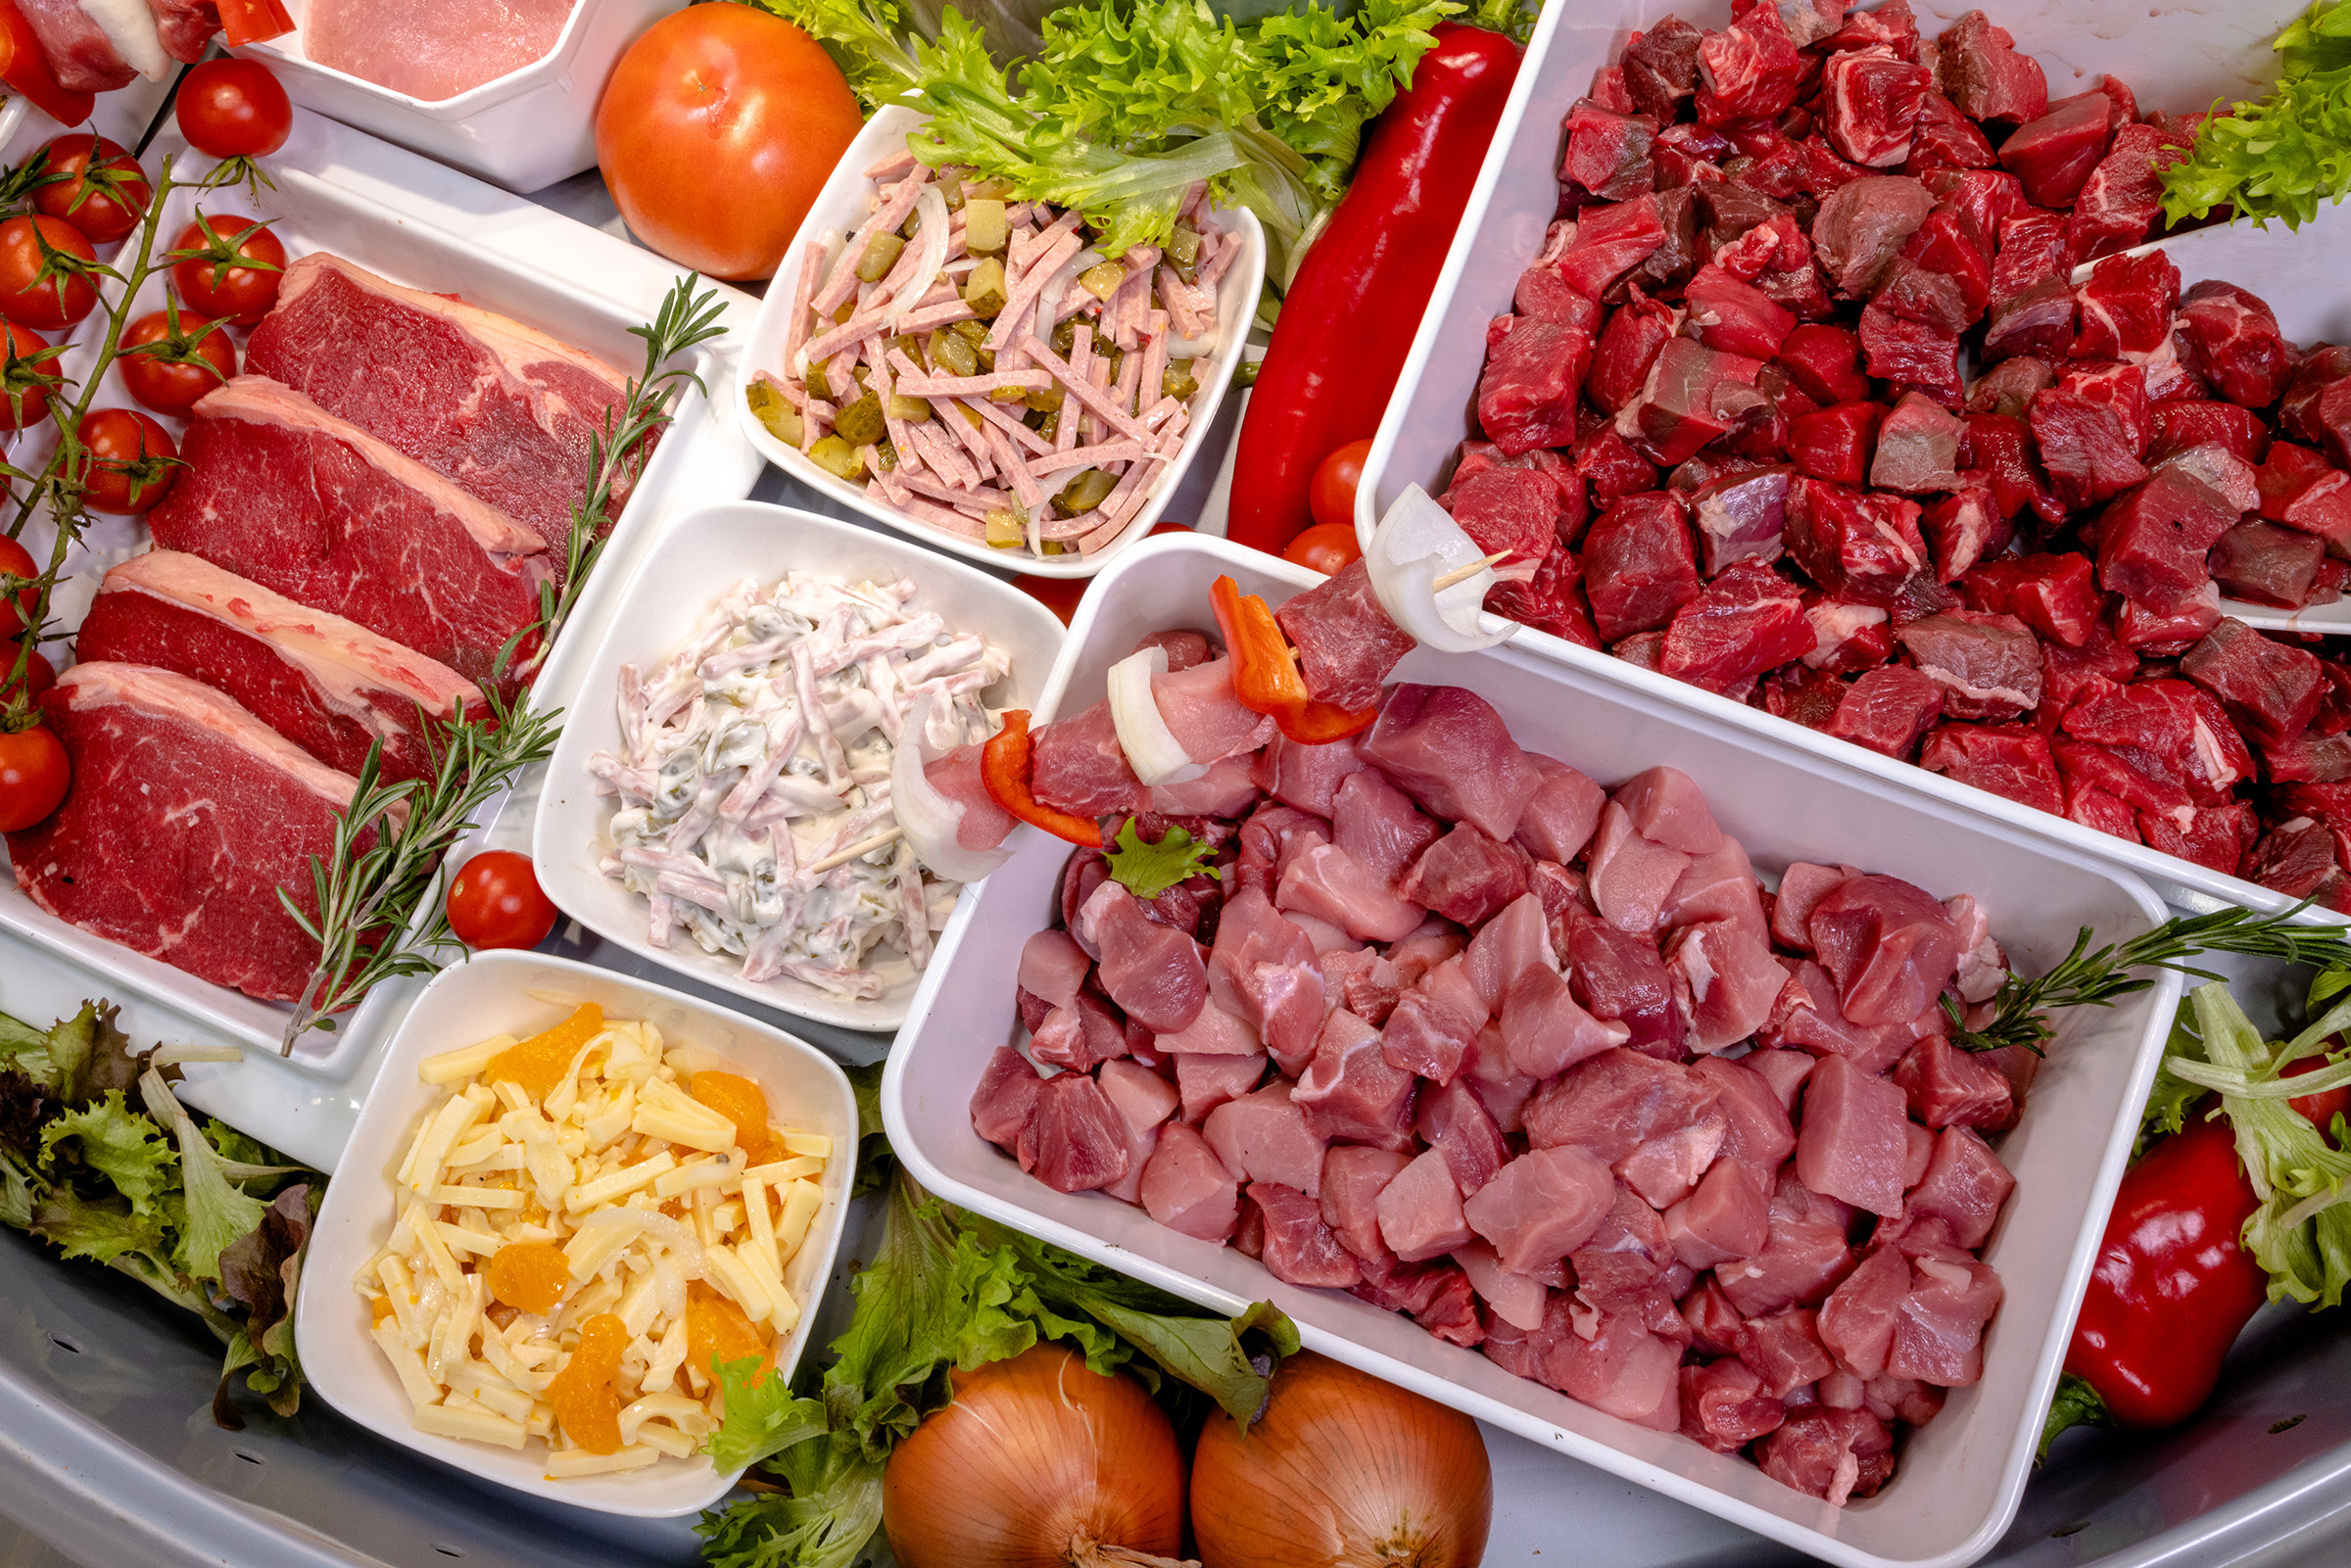 Diced Meat Products Butcher Counter